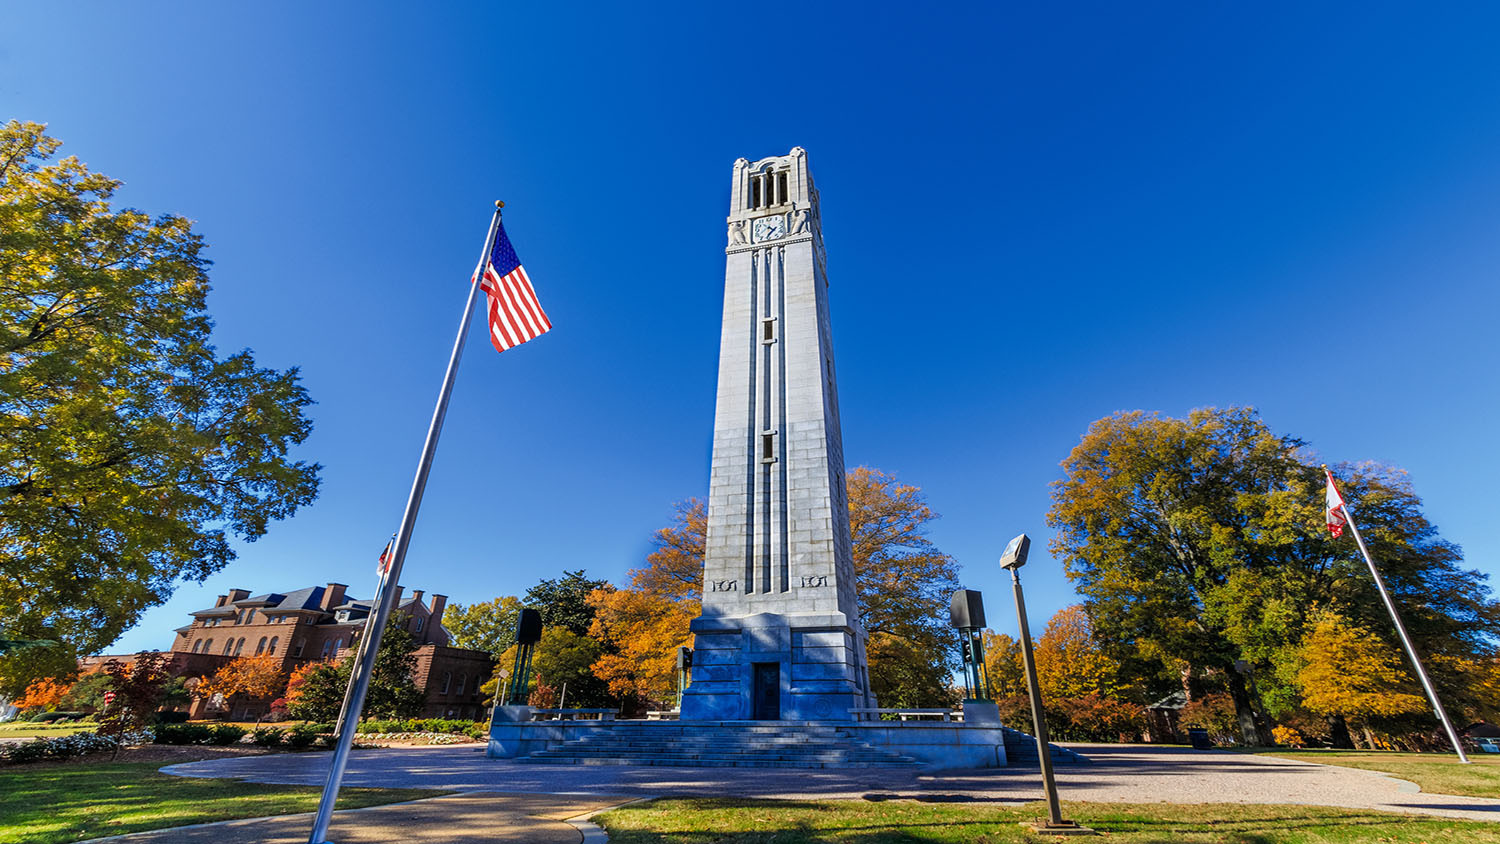 As a nationally recognized university for research and innovation, NC State University’s partnership with CESMII, the United States’ national institute on Smart Manufacturing, will help enhance the capabilities of campus pilot plants such as the Department of Forest Biomaterials’ paper plant. Credit: iStock